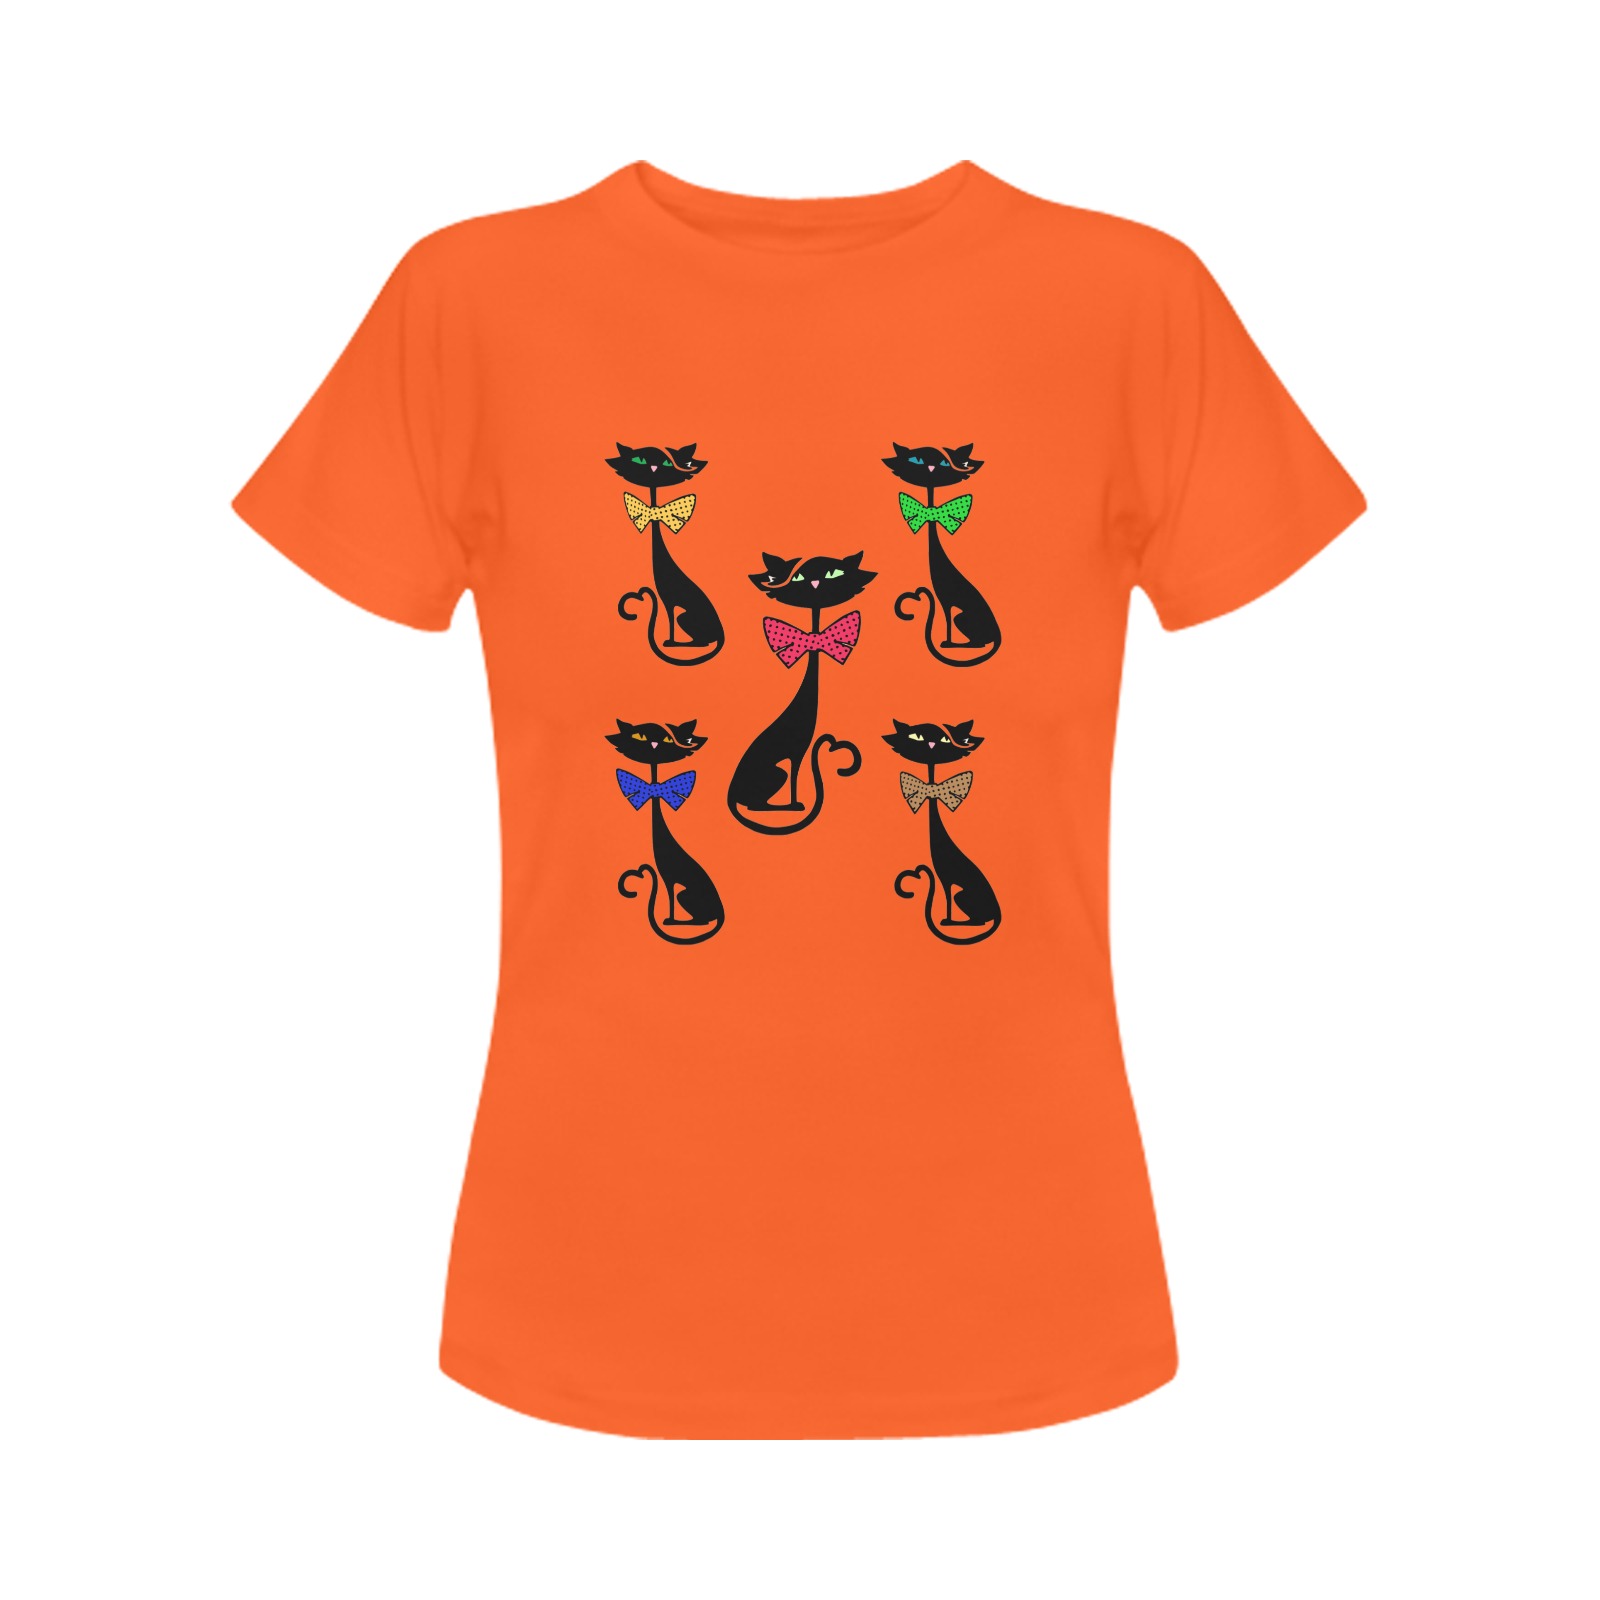 Black Cat with Bow Ties - Orange Women's T-Shirt in USA Size (Front Printing Only)